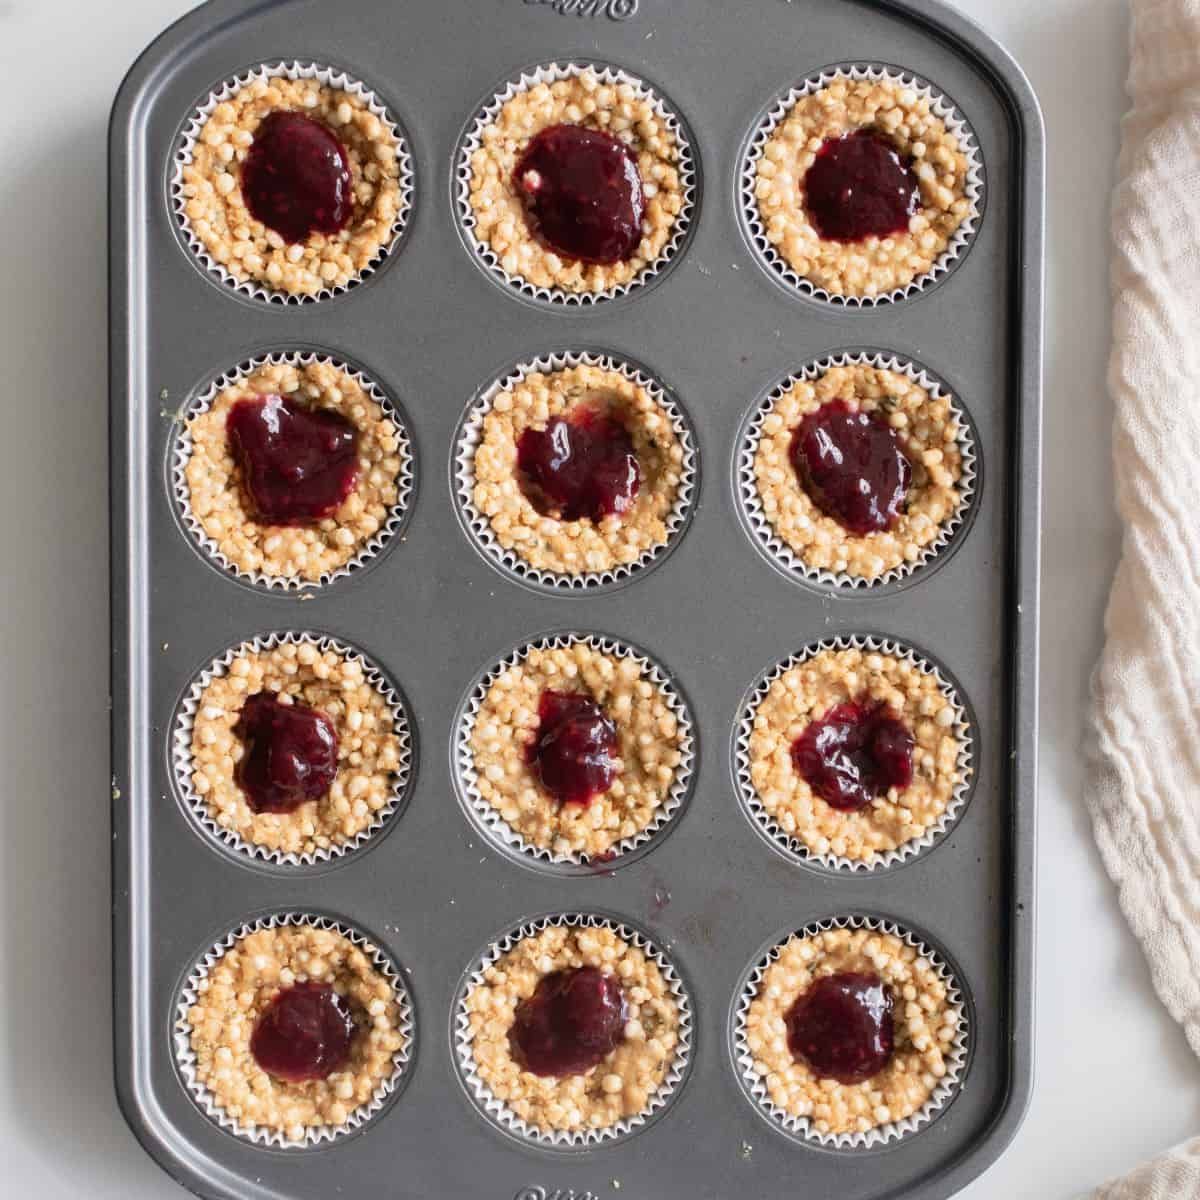 Mixed berry jam dropped on top of puffed quinoa mixture pressed into lined muffin tin.